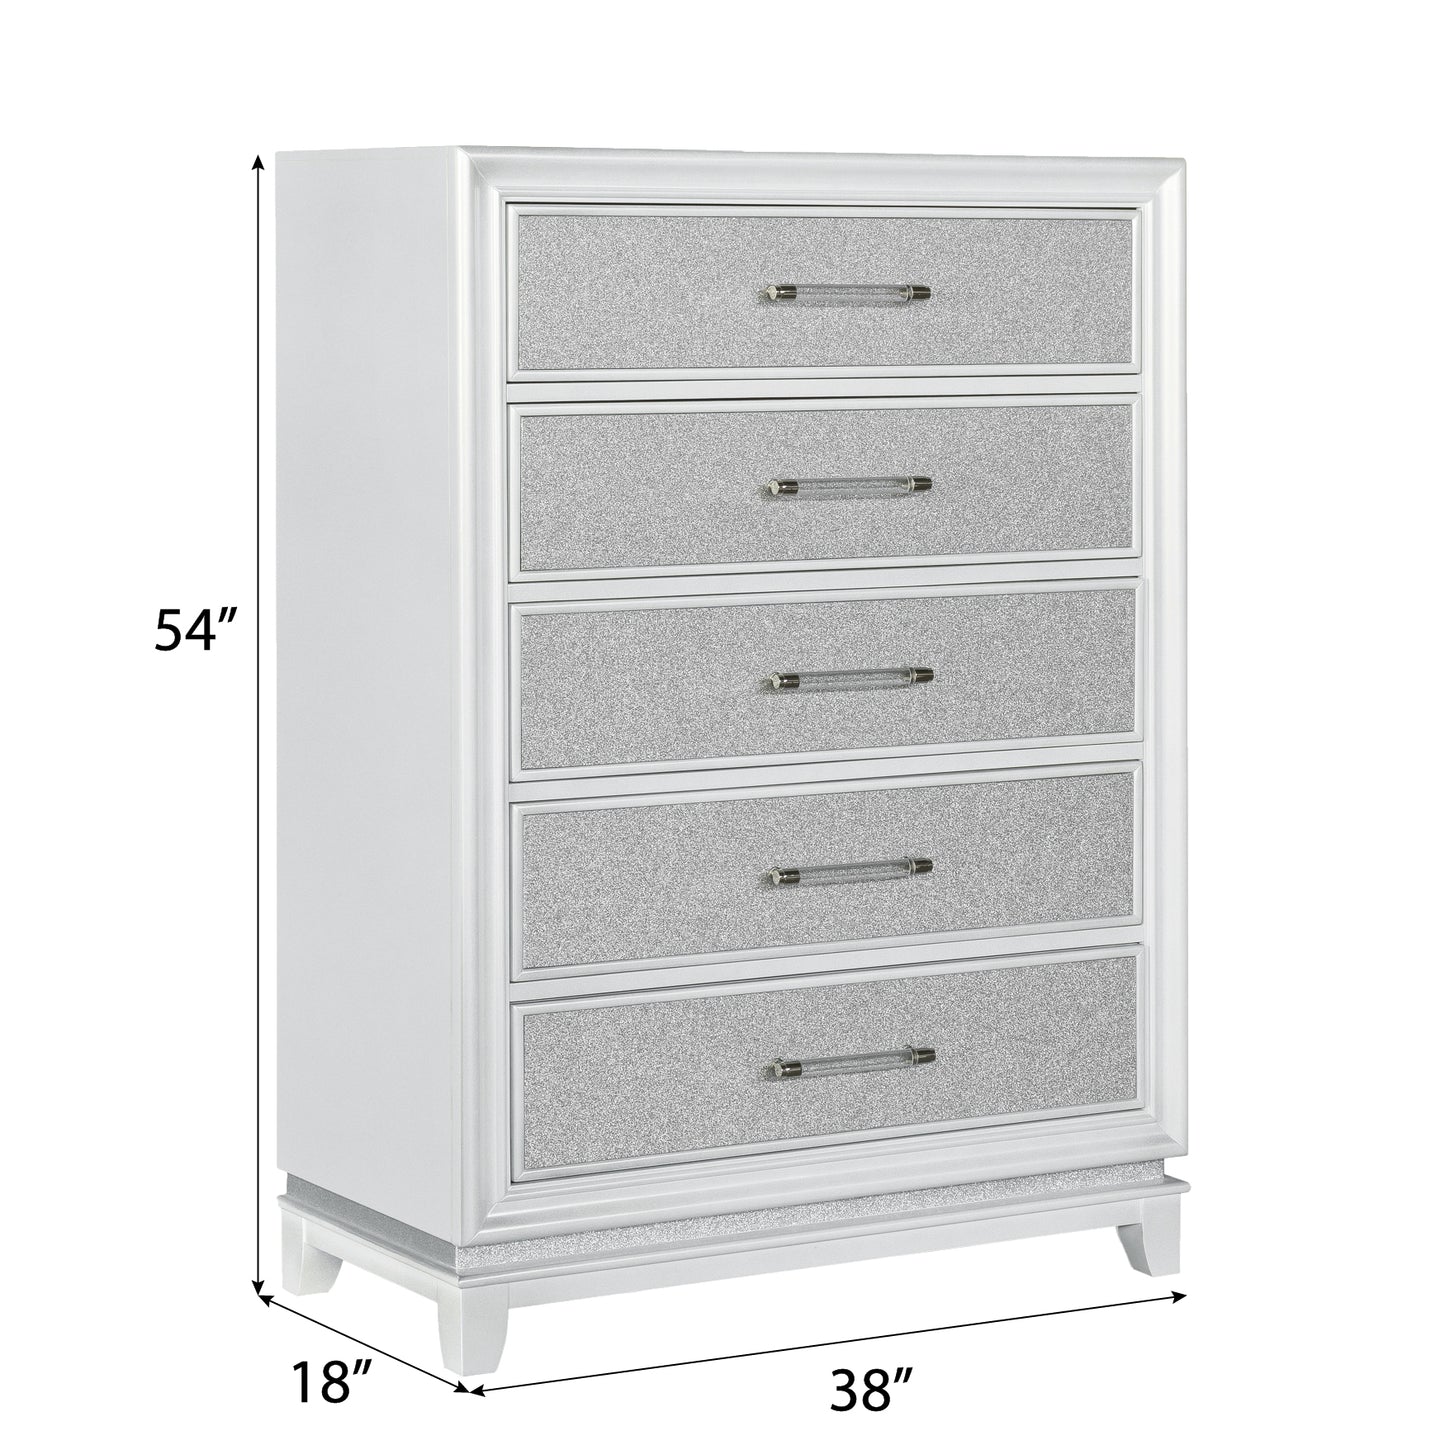 Galaxy 5-Drawer Bedroom Chest with LED Lights, Pearlized White